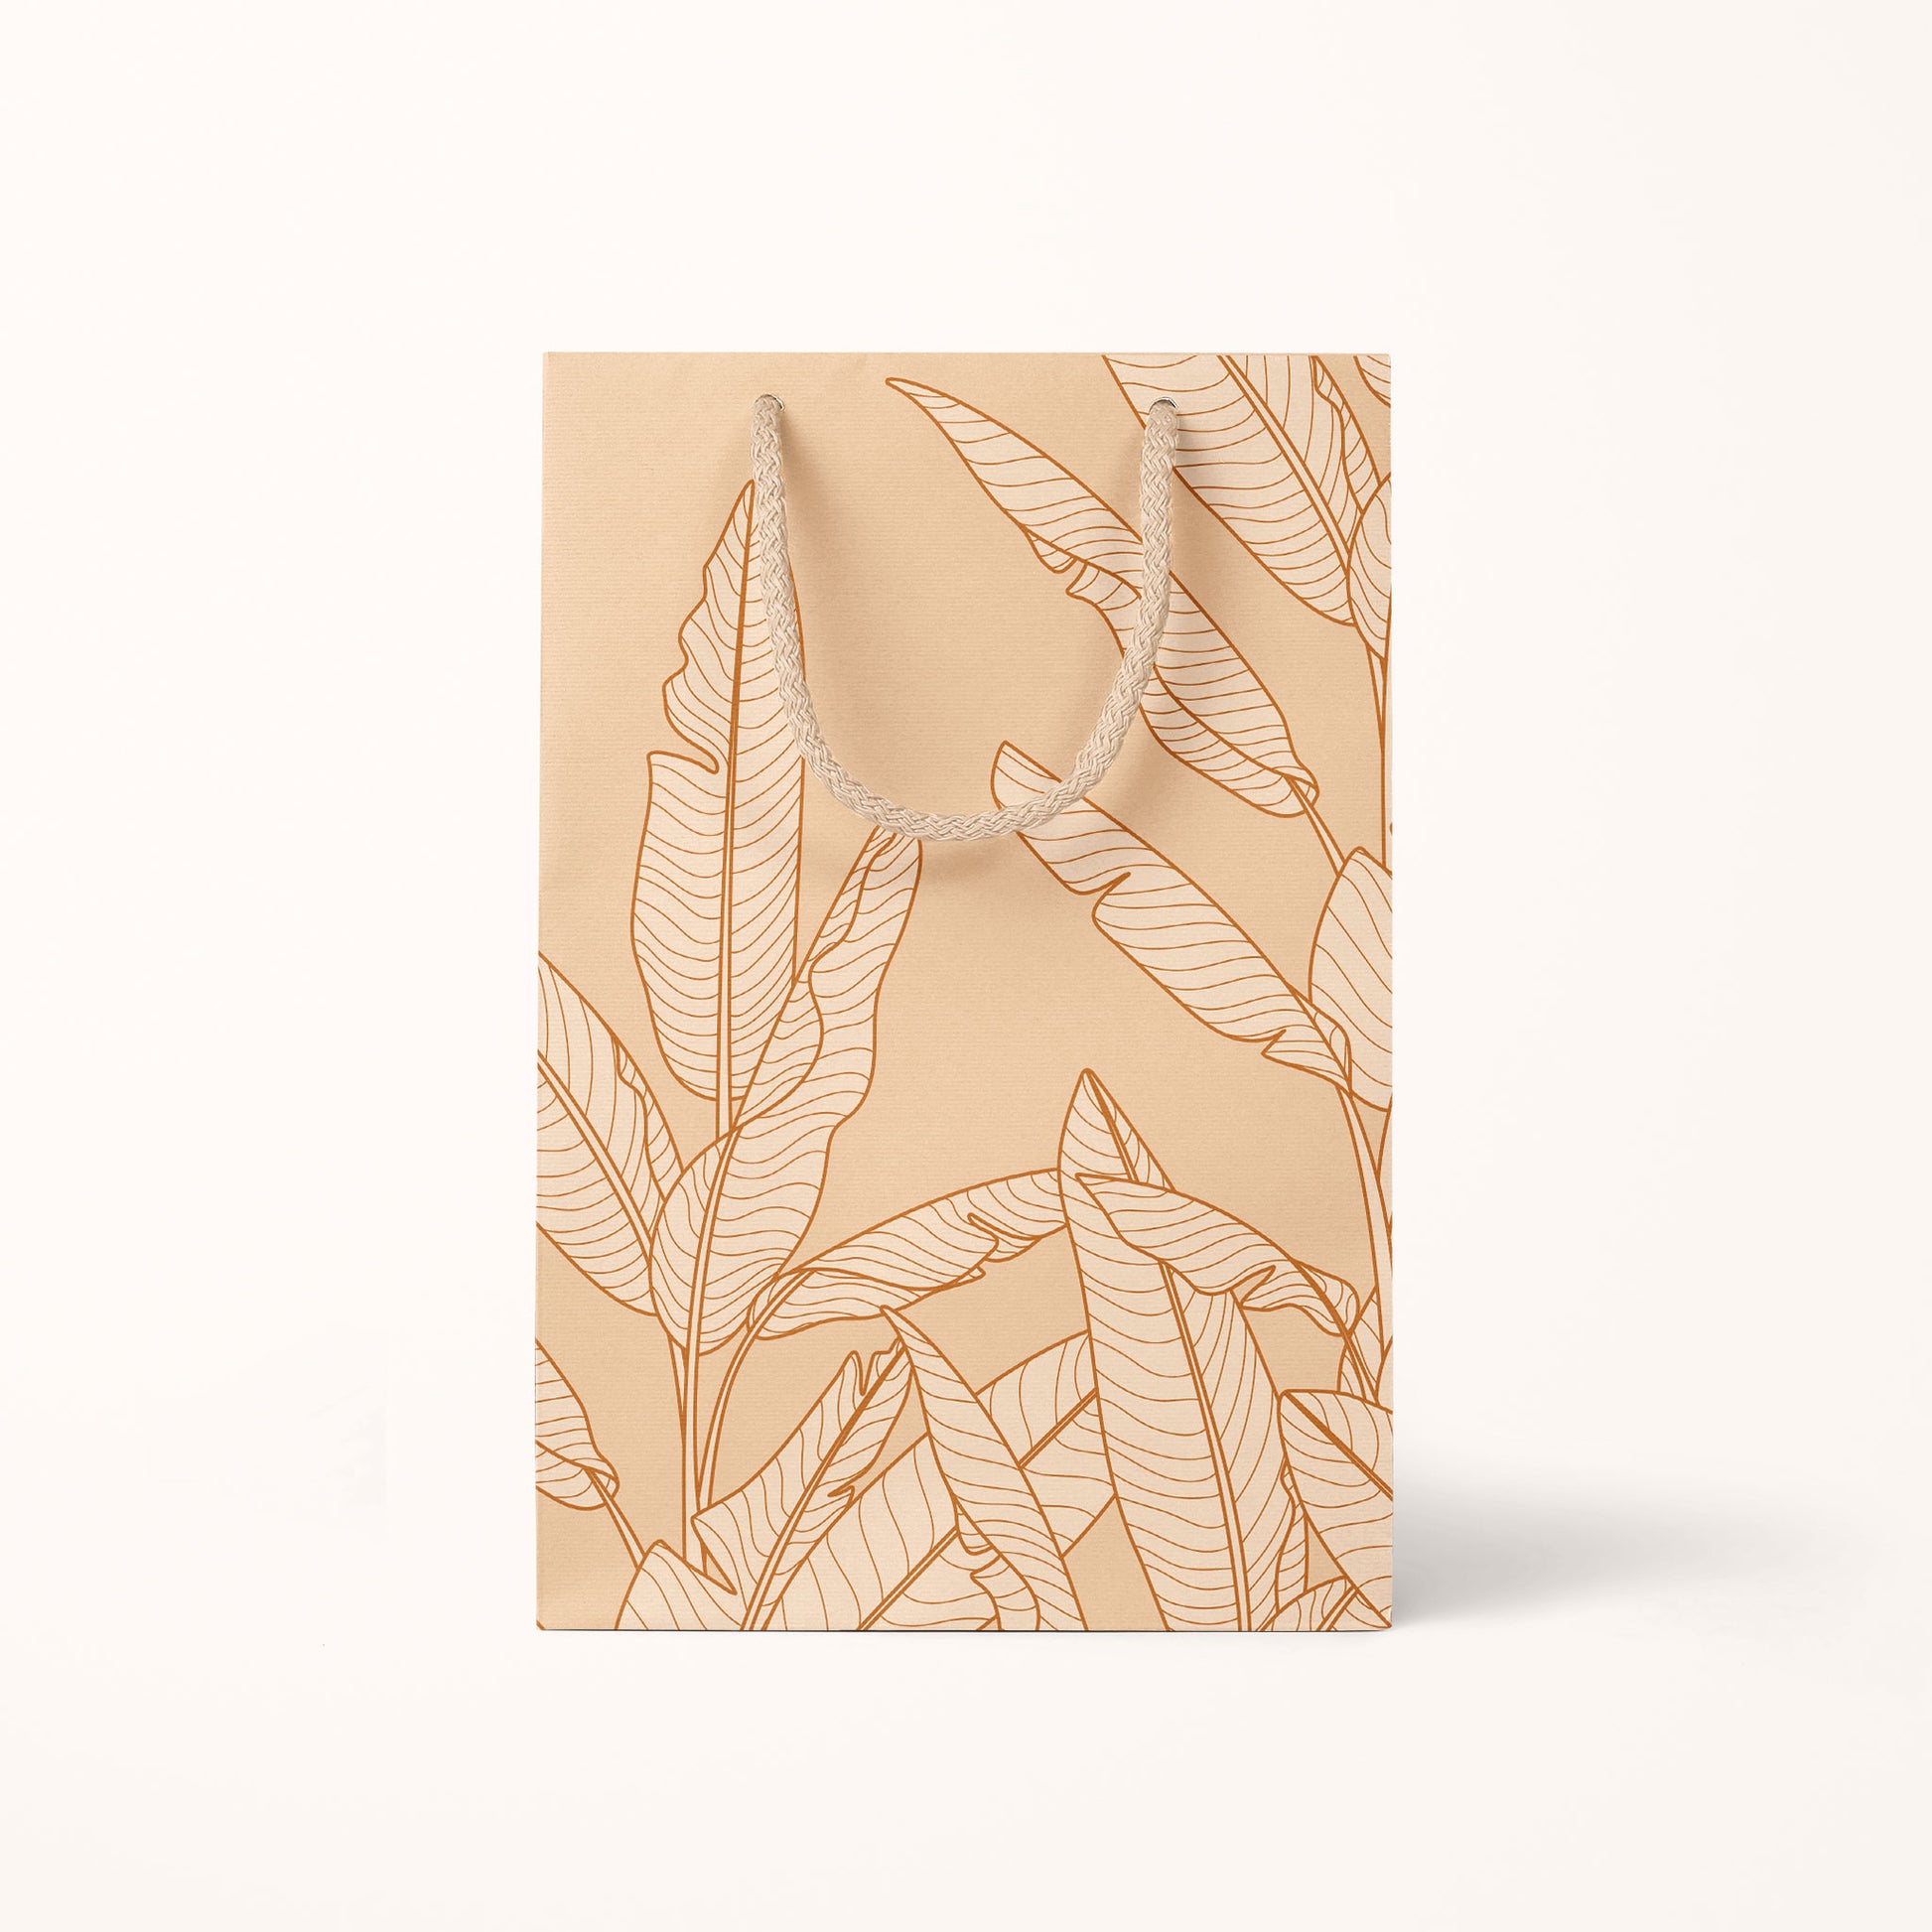 The smaller size of the gift bag that features cream cotton handles and super light shade of salmon pink with graphics of banana leaves.